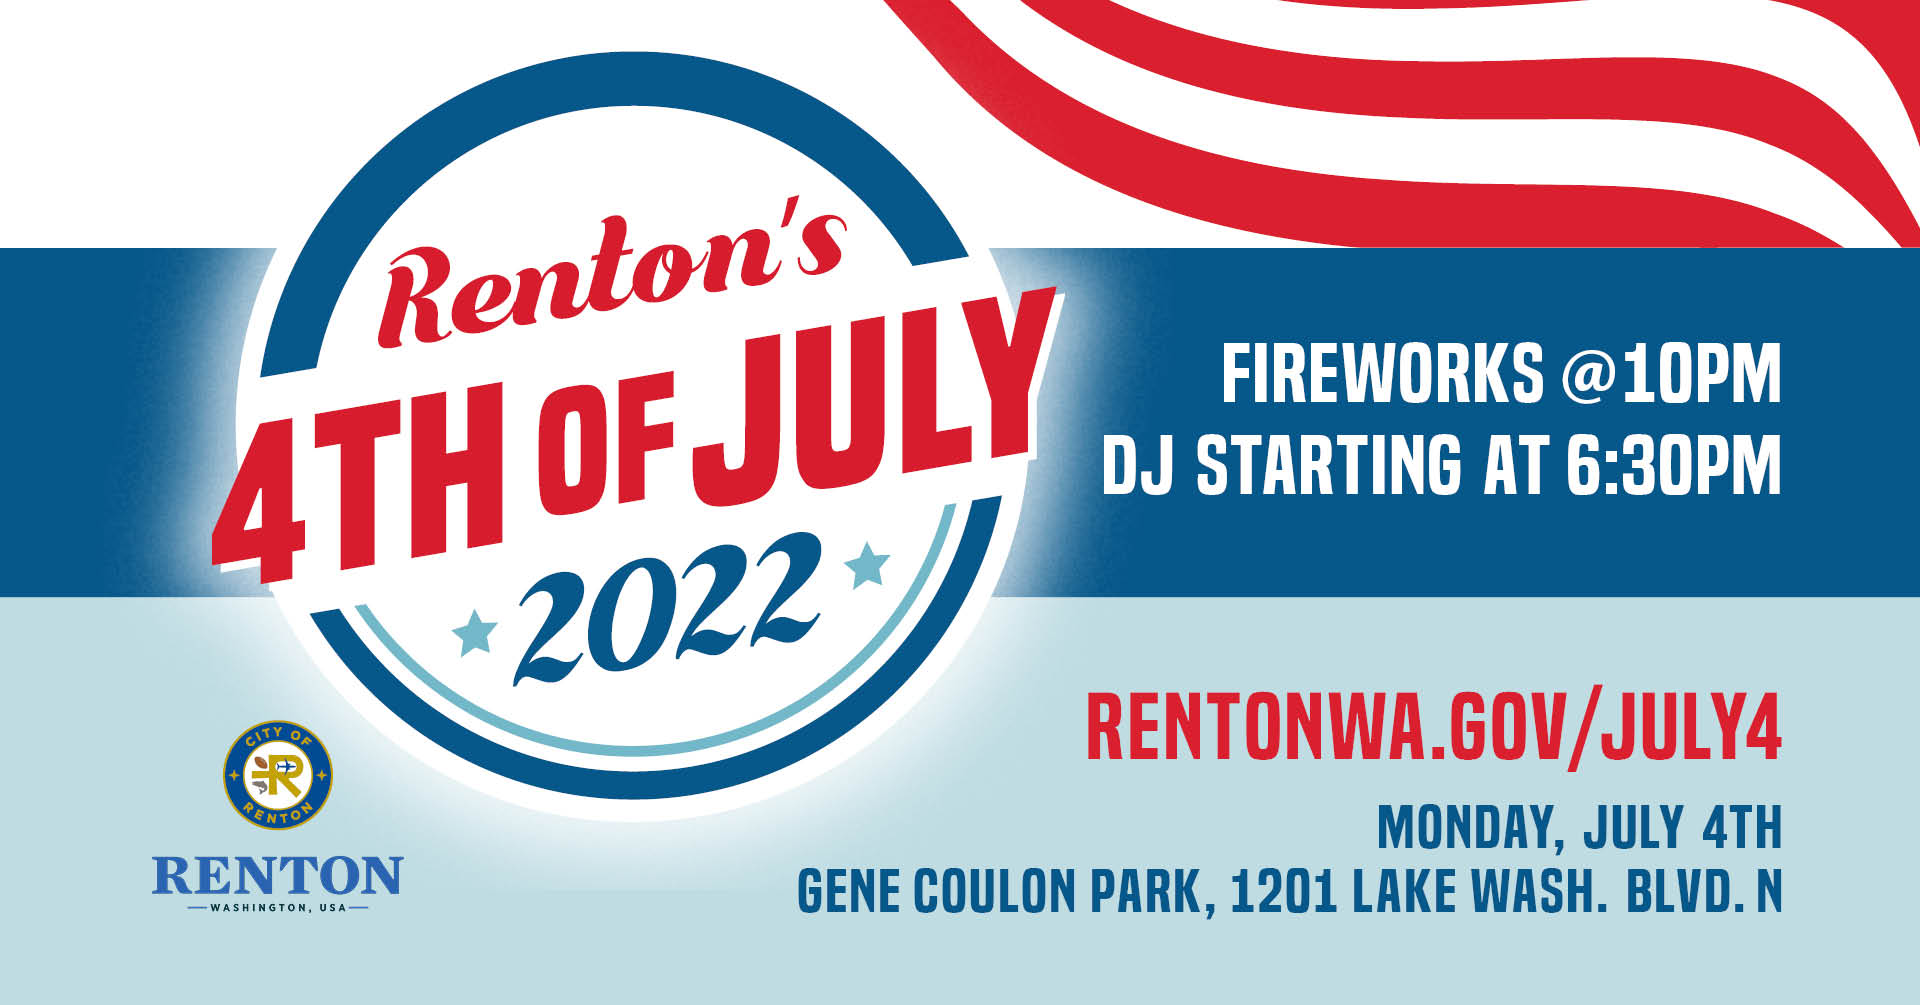 text on graphic: Renton 4th of July 2022 , fireworks at 10pm , DJ at 6:30pm